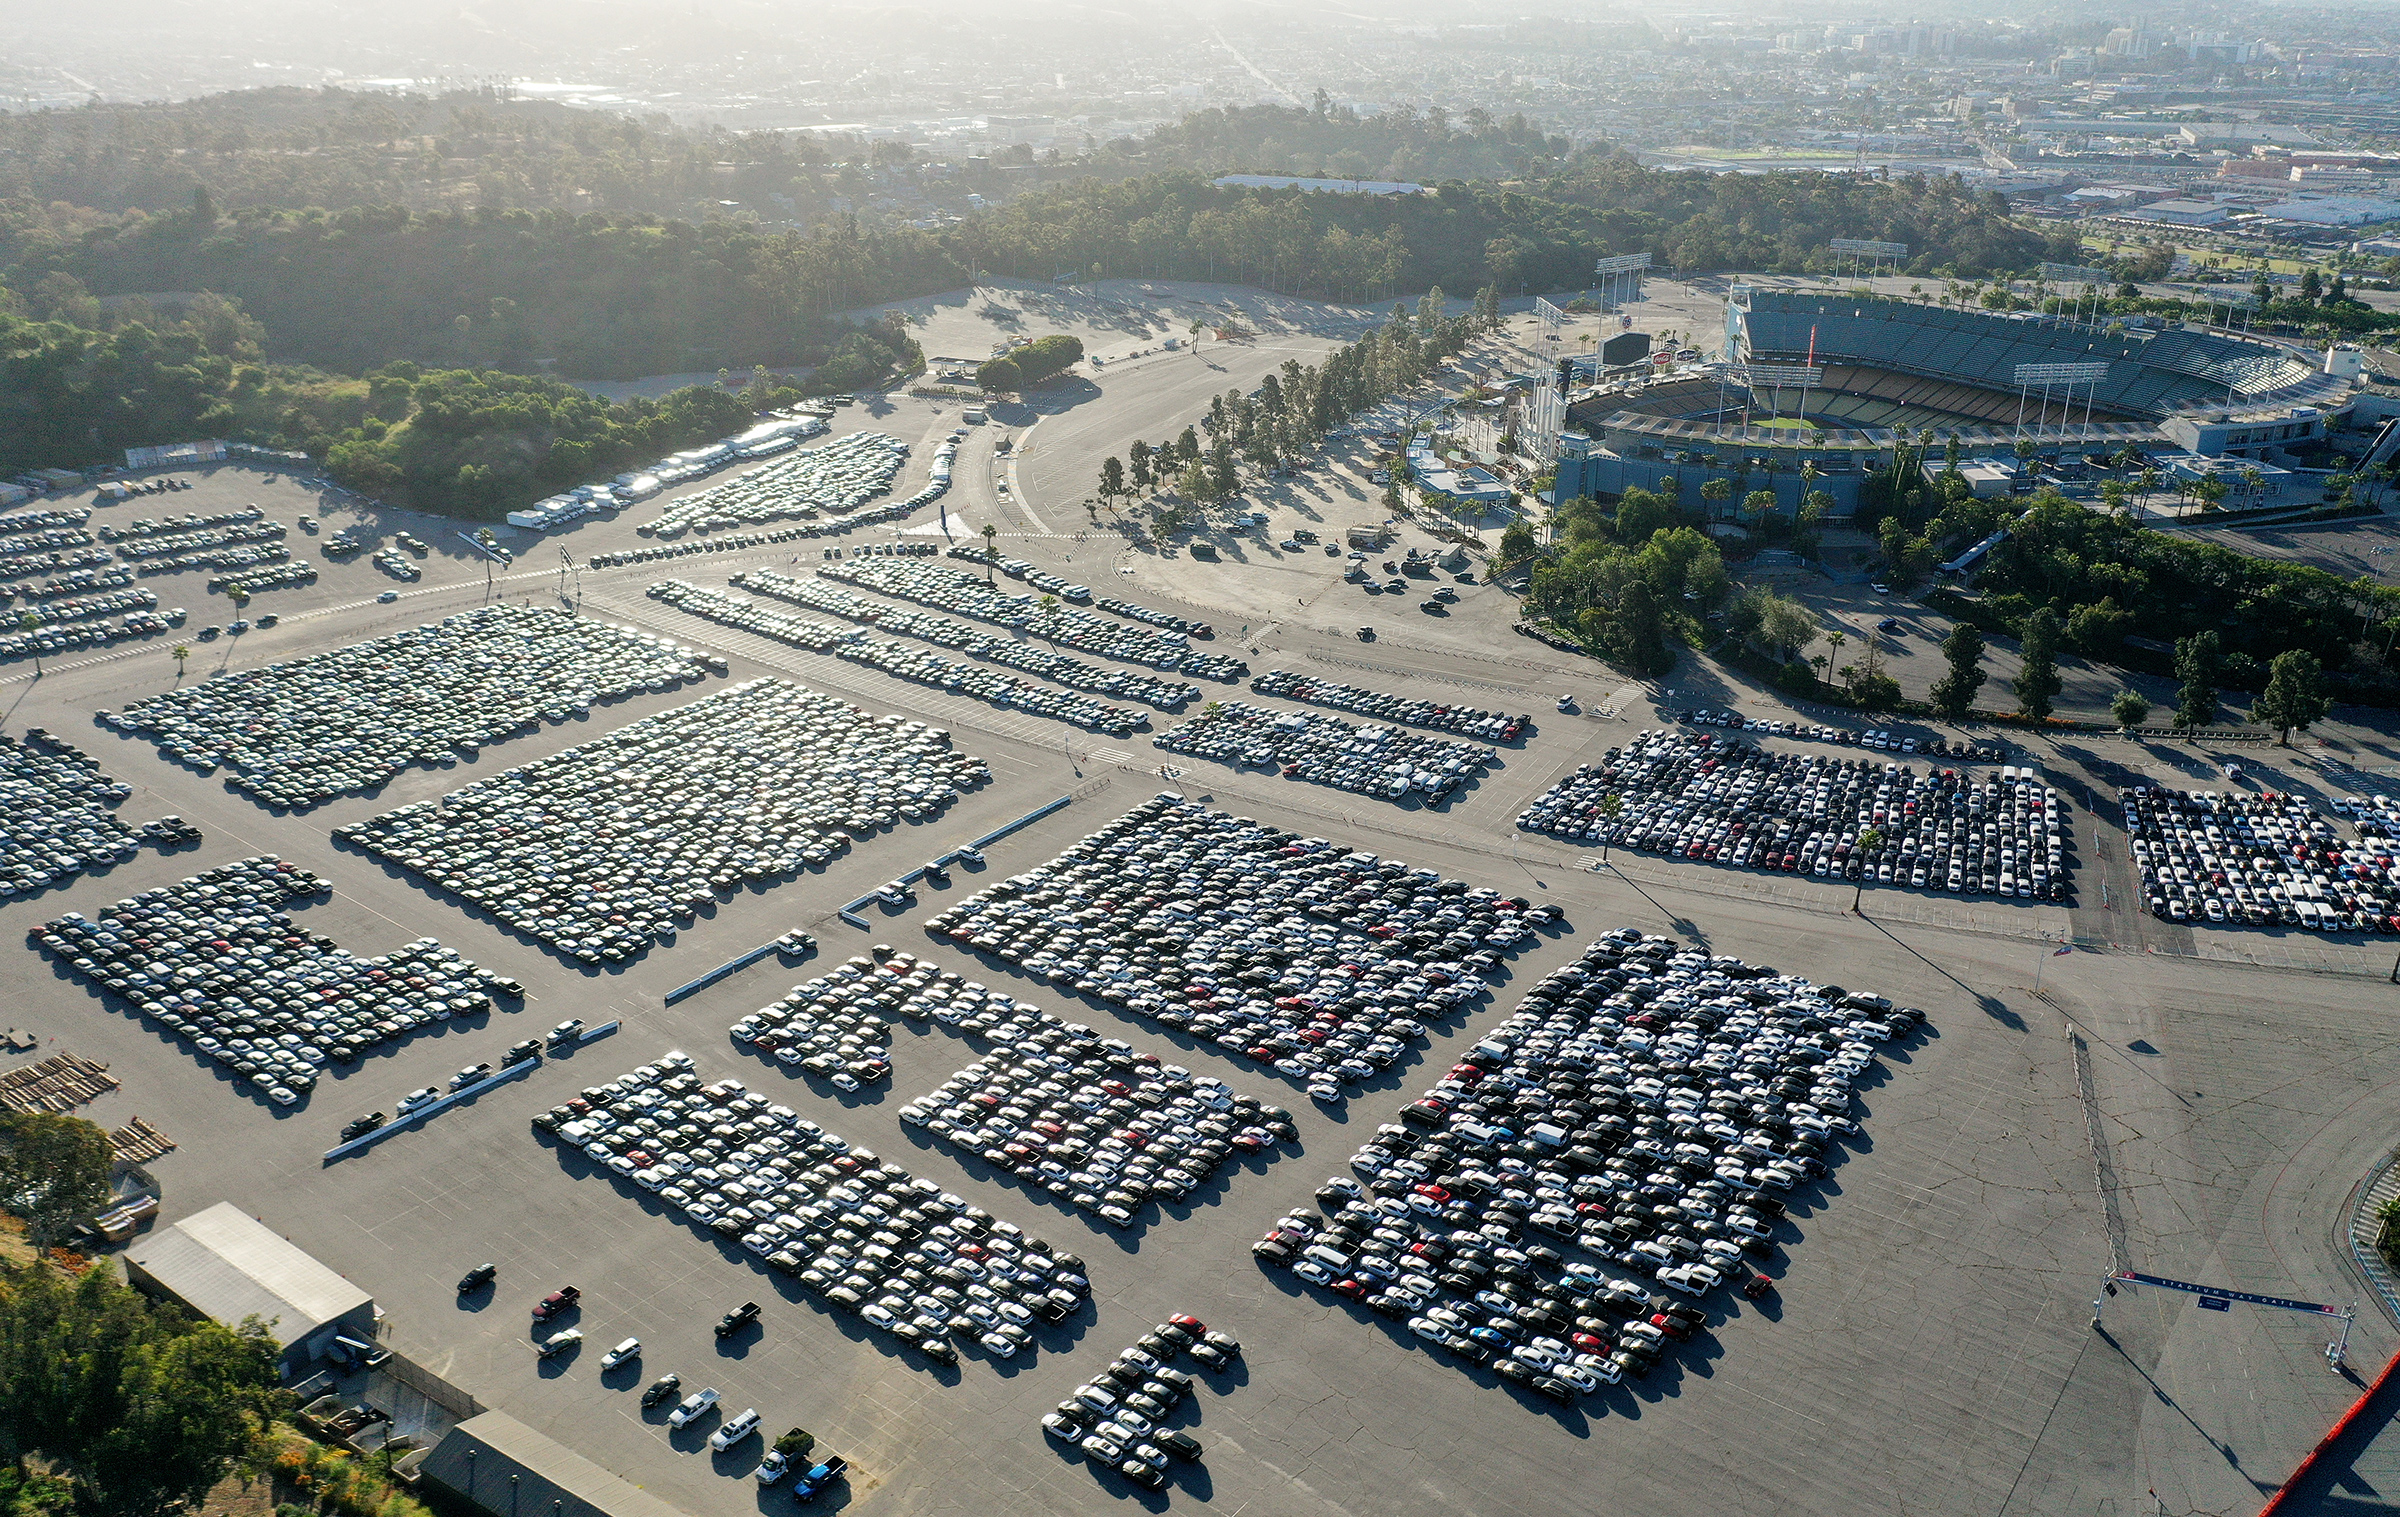 An aerial view of rental cars parked at Dodger Stadium in Los Angeles on May 20, 2020. (Mario Tama—Getty Images)